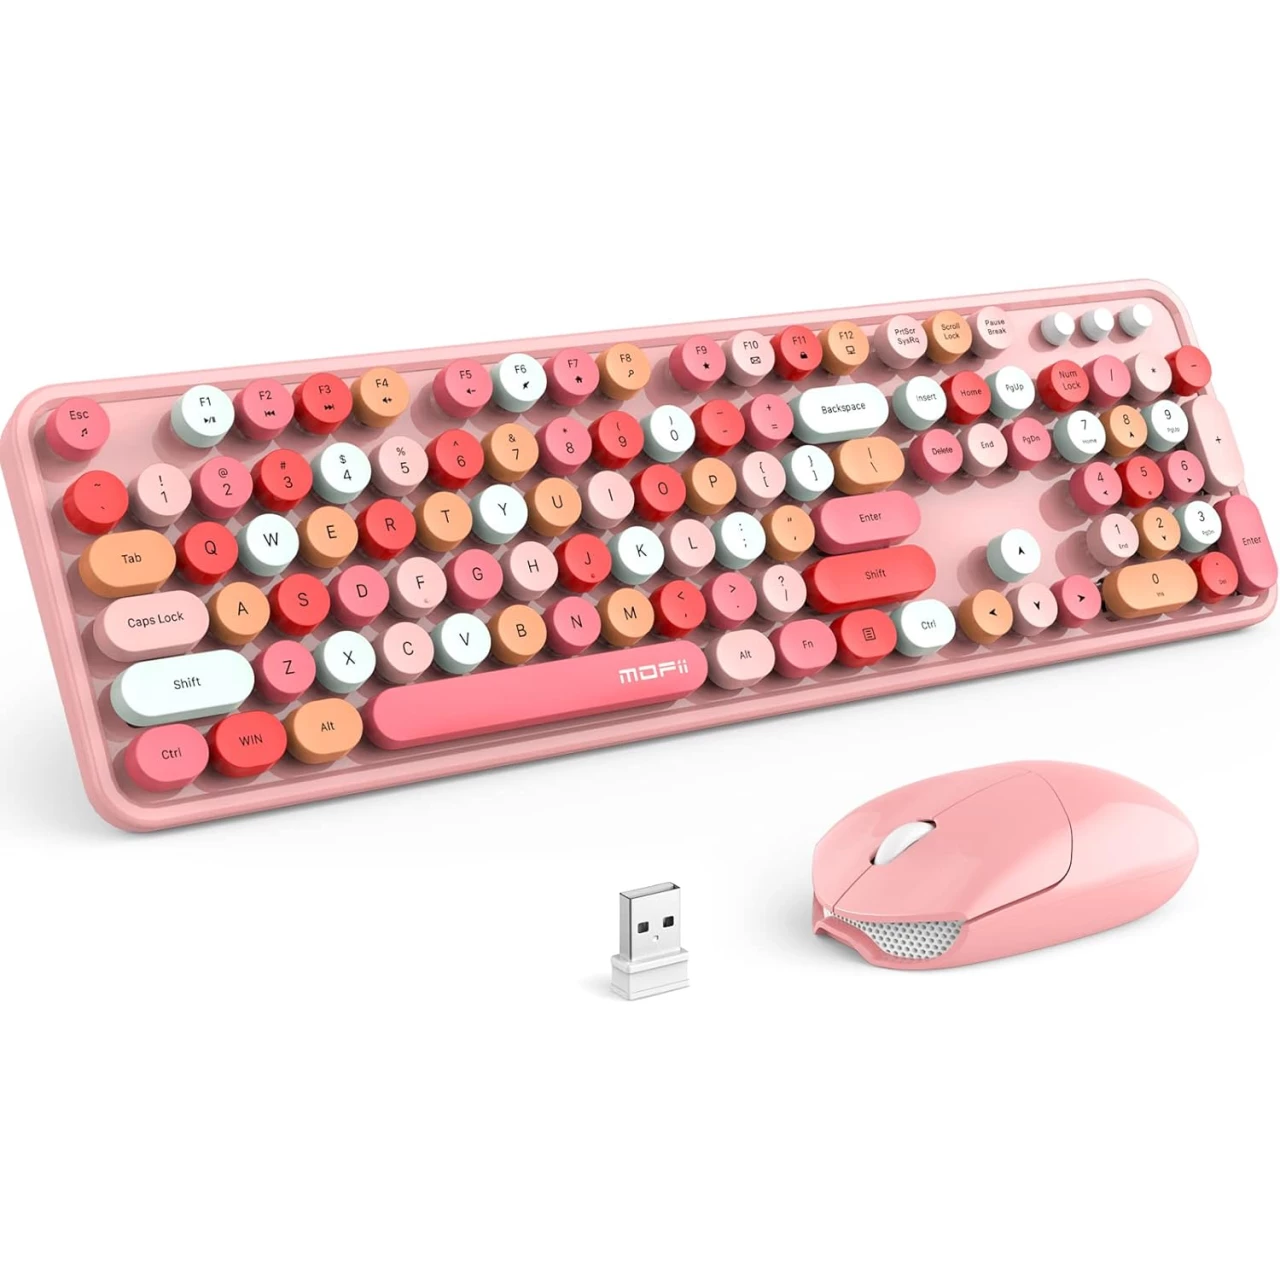 MOFII Wireless Keyboard and Mouse Combo, Pink Keyboard, 2.4GHz Retro Full Size with Number Pad &amp; Cute Wireless Mouse for Computer PC Laptop Notebook Mac Windows XP/7/8/10 (Pink-Colorful)